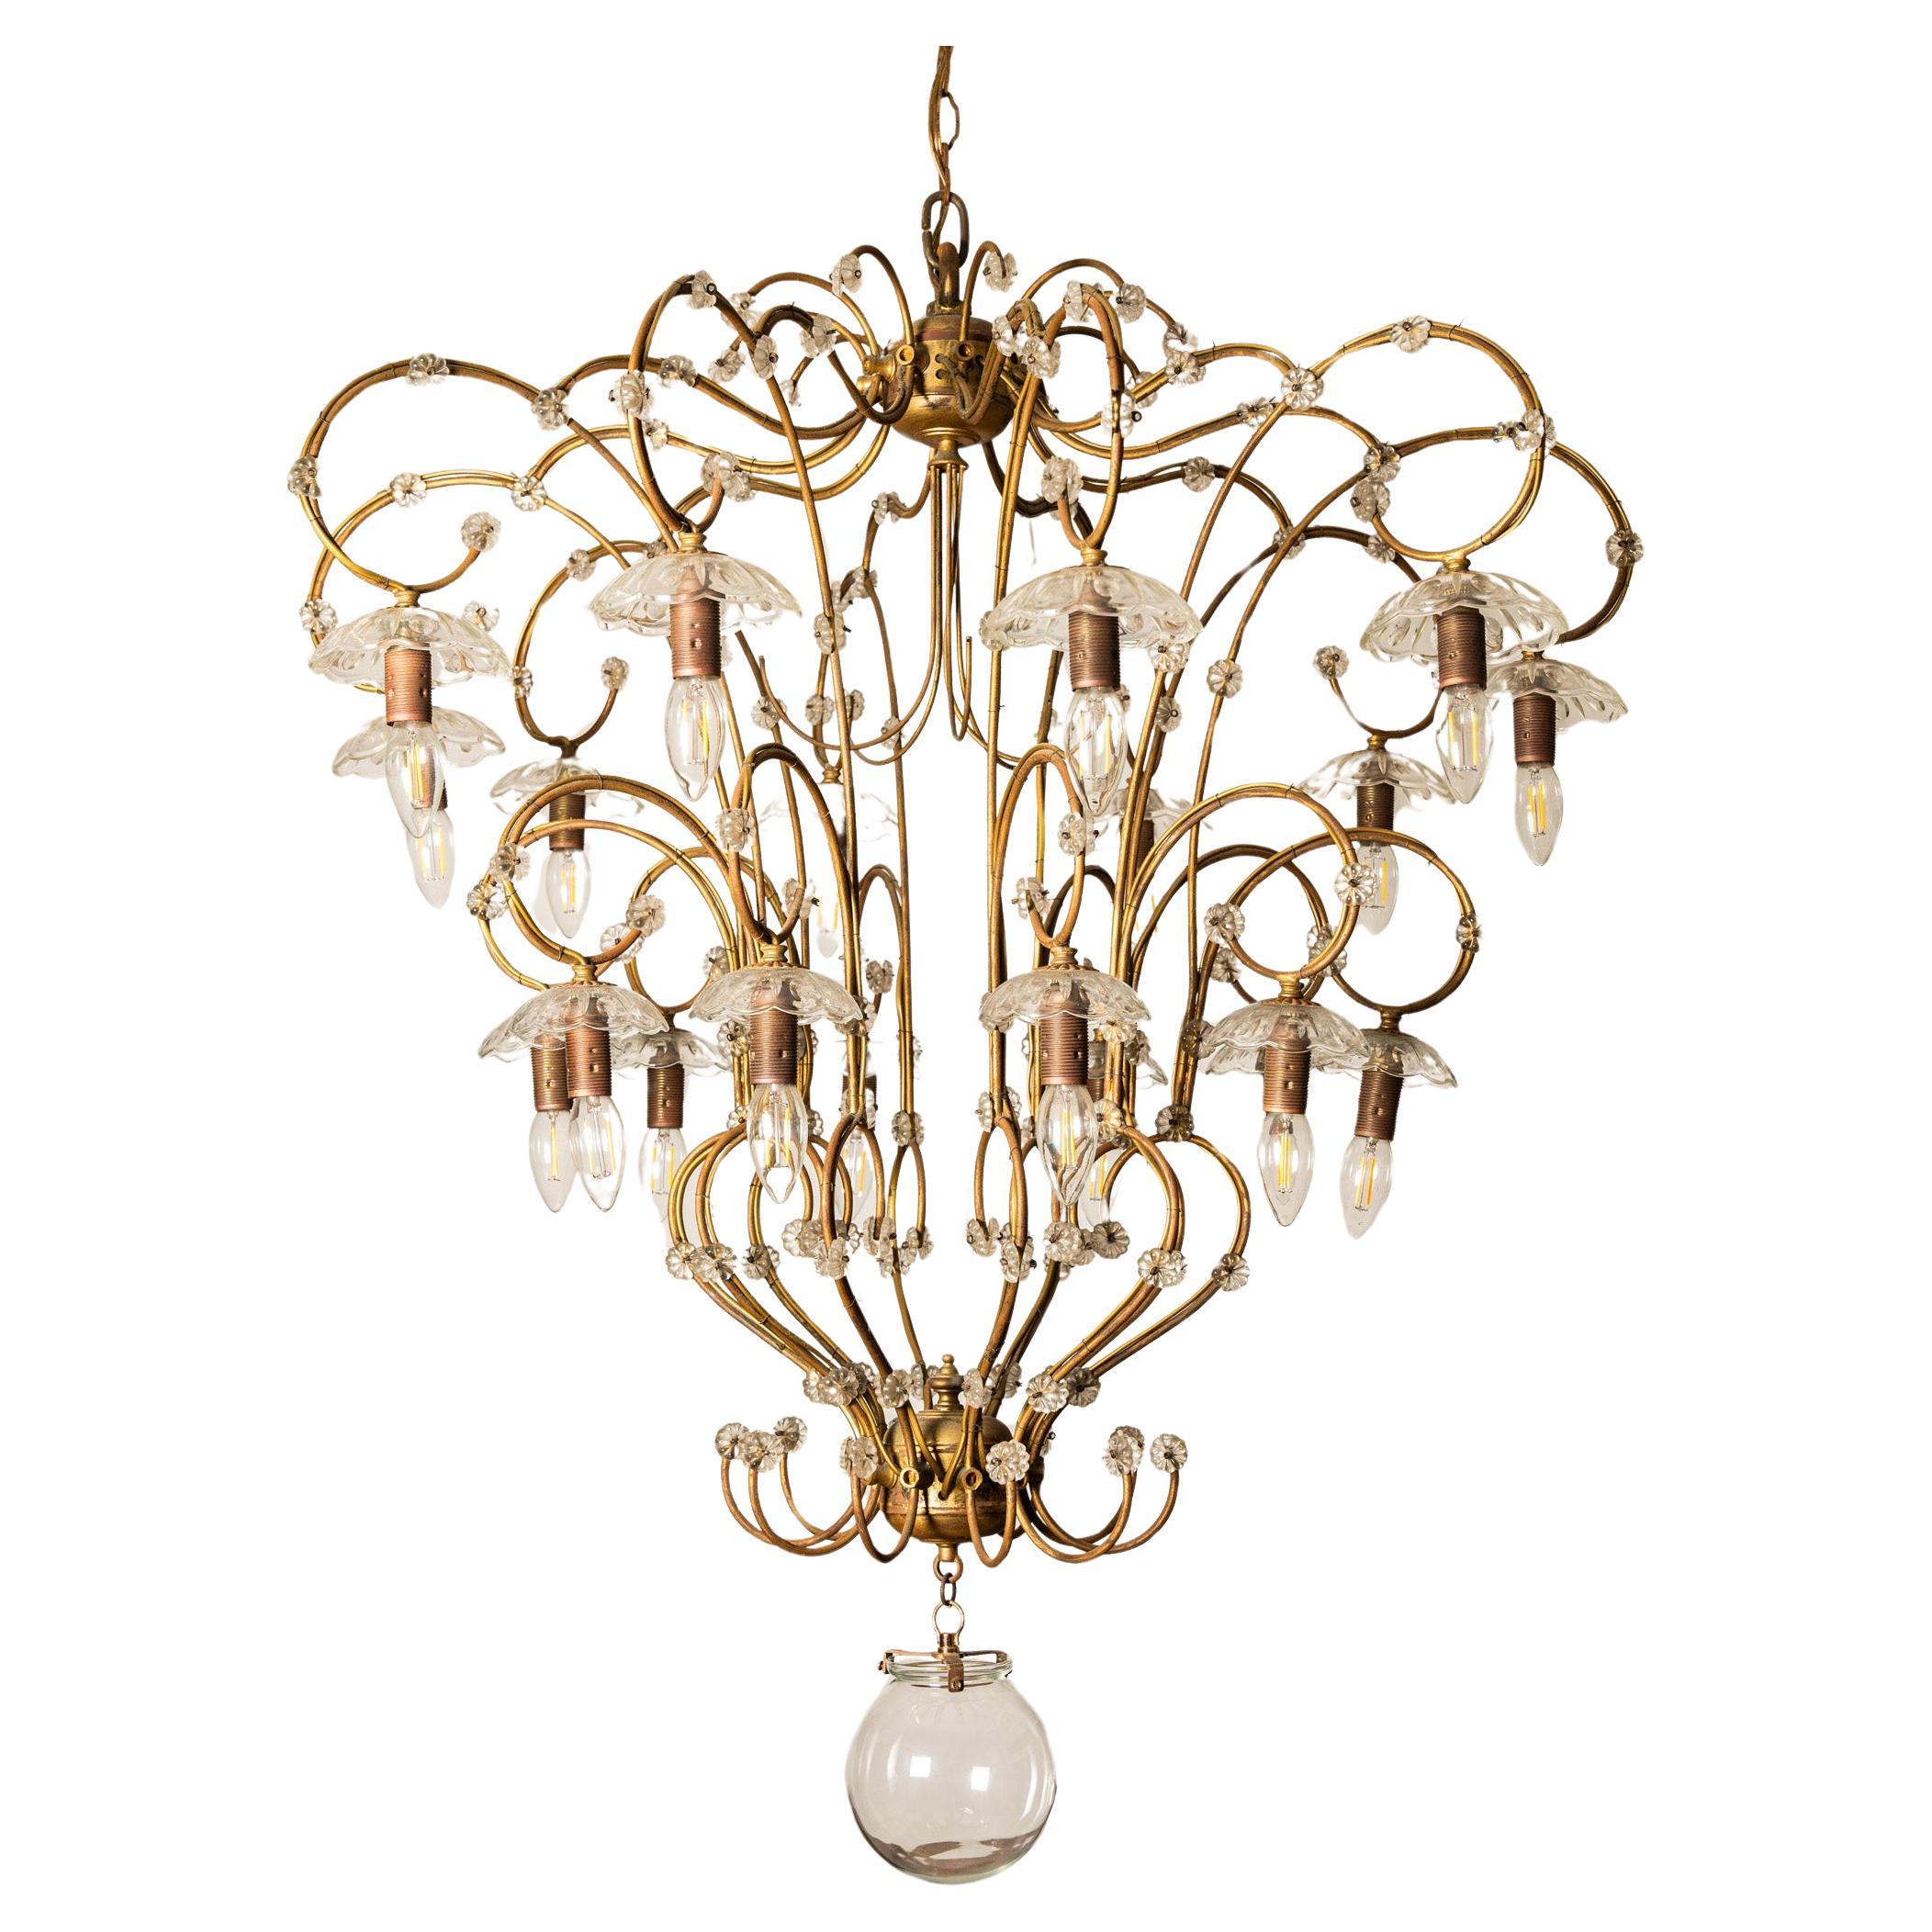 Large 20-light brass and glass chandelier chandelier  For Sale